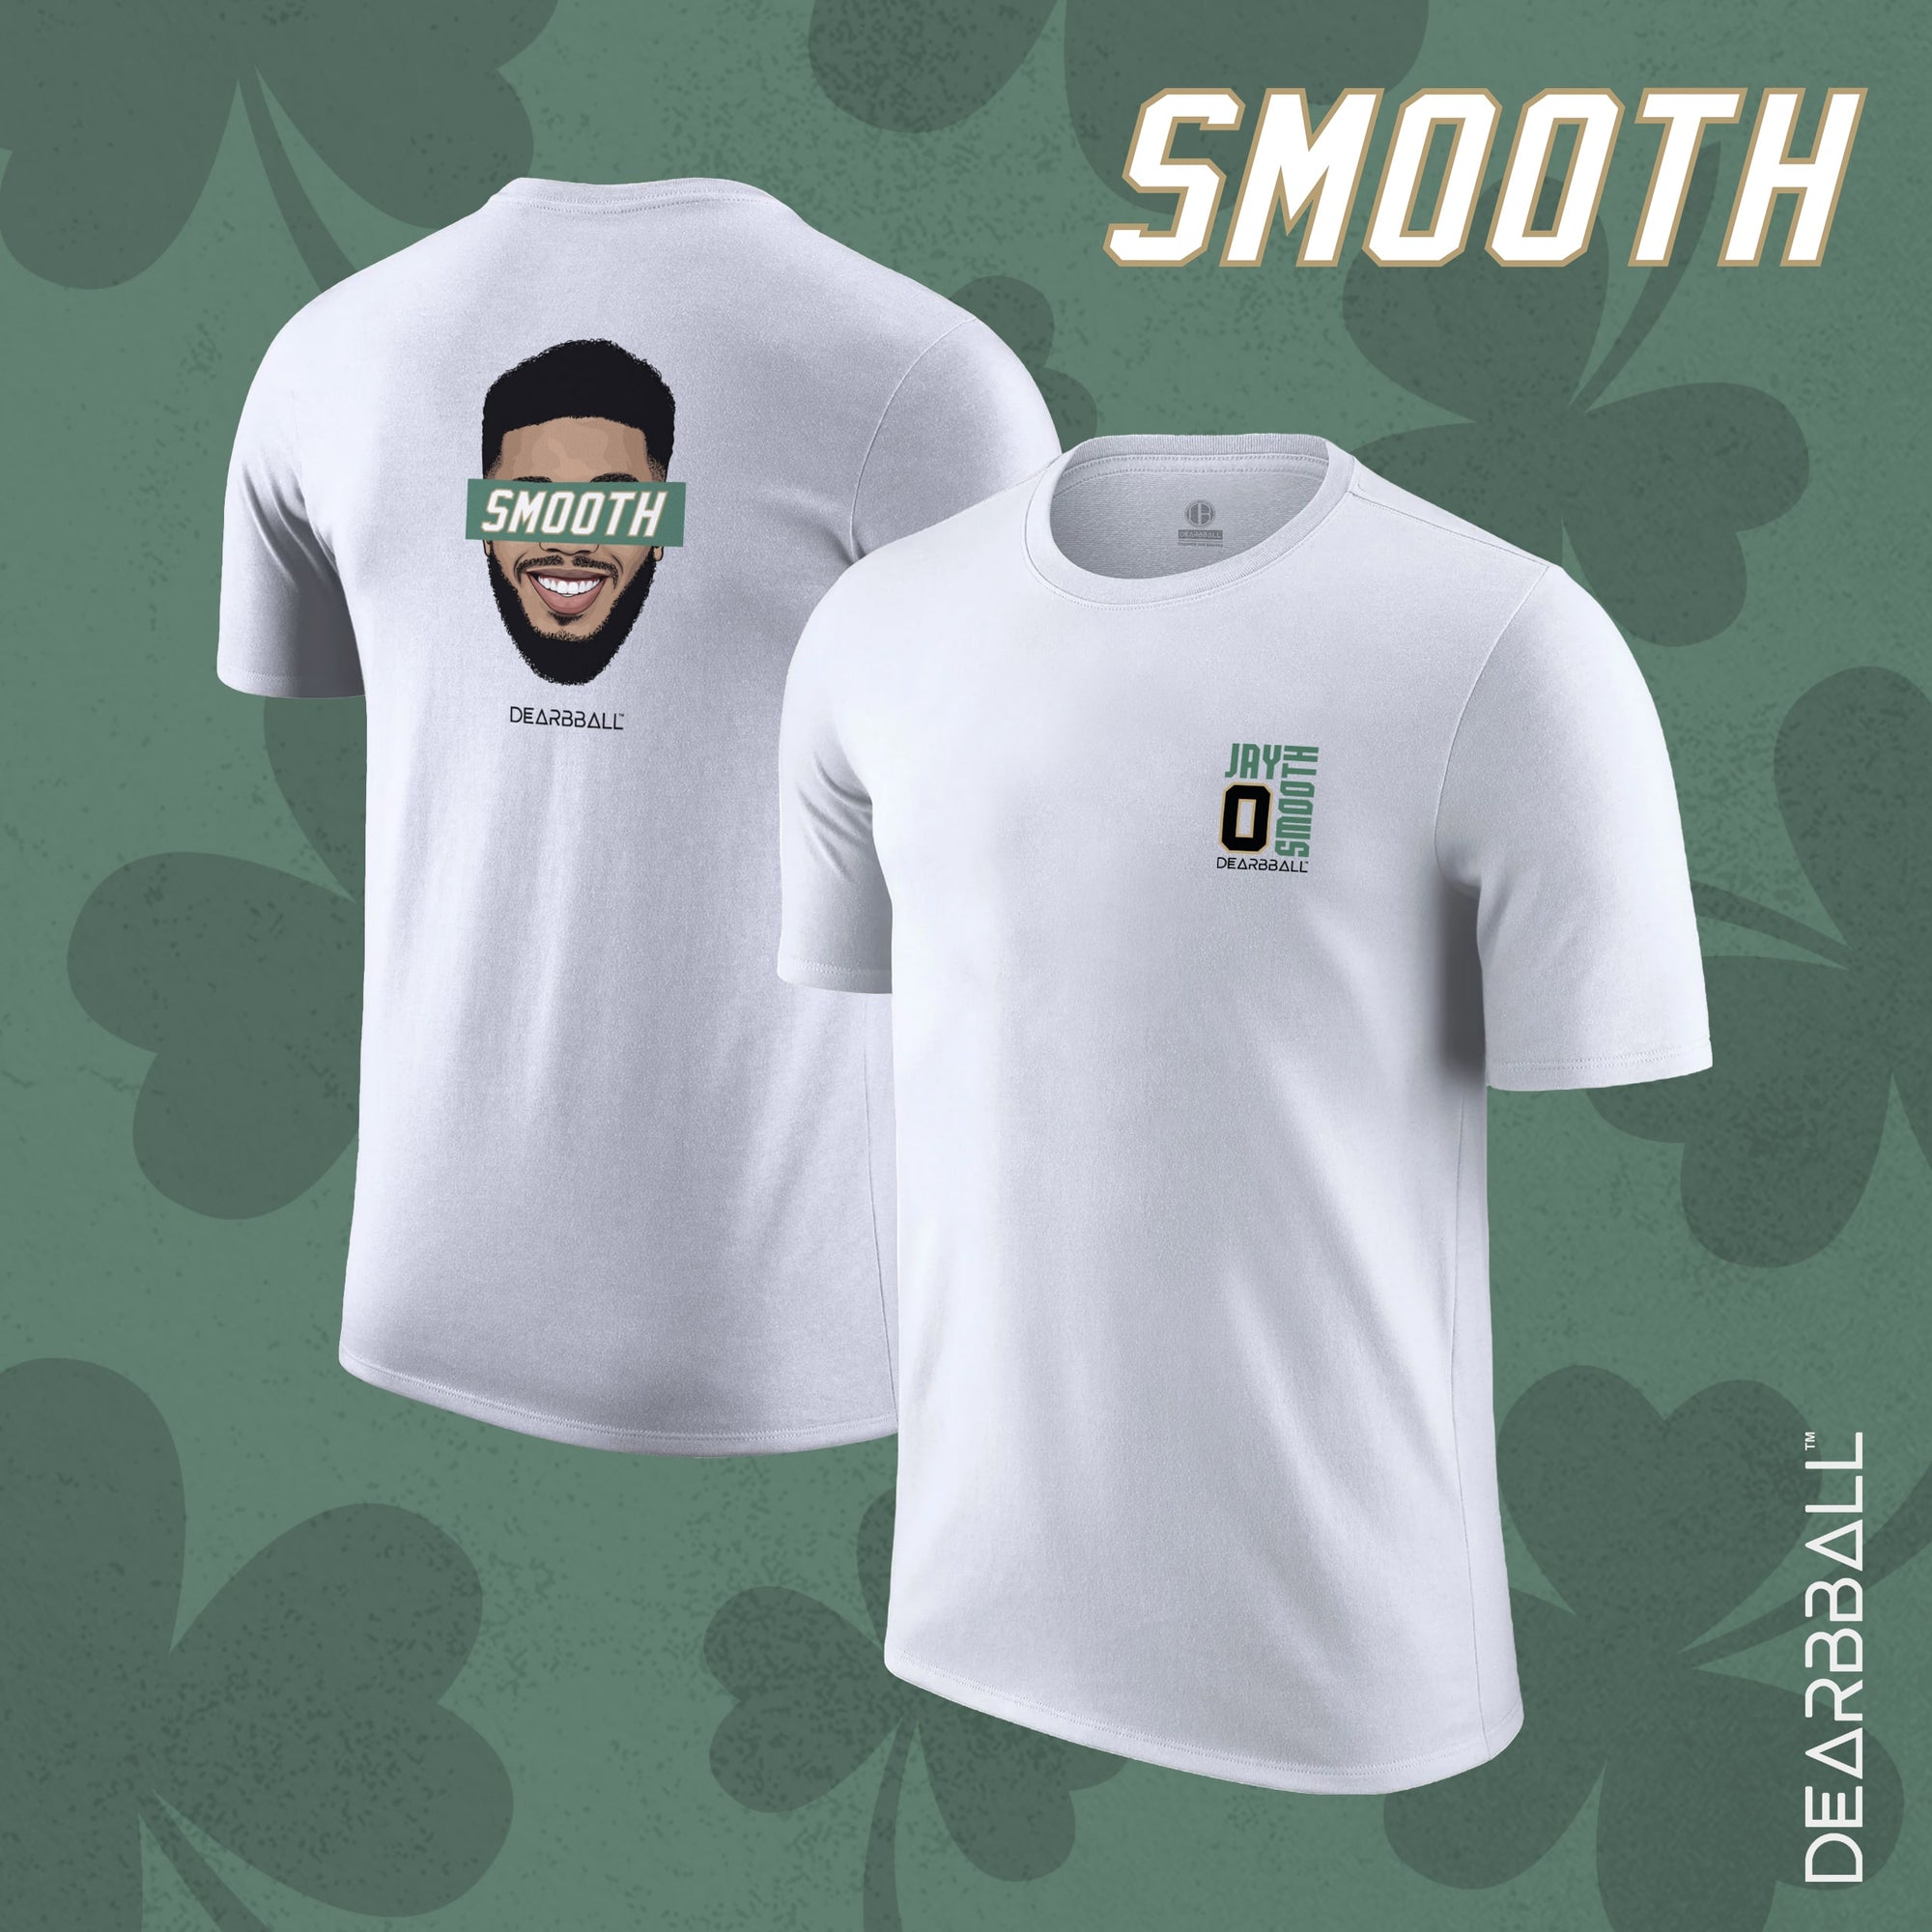 DearBBall T-Shirt - SMOOTH Boston Embroidered Patch Premium Edition